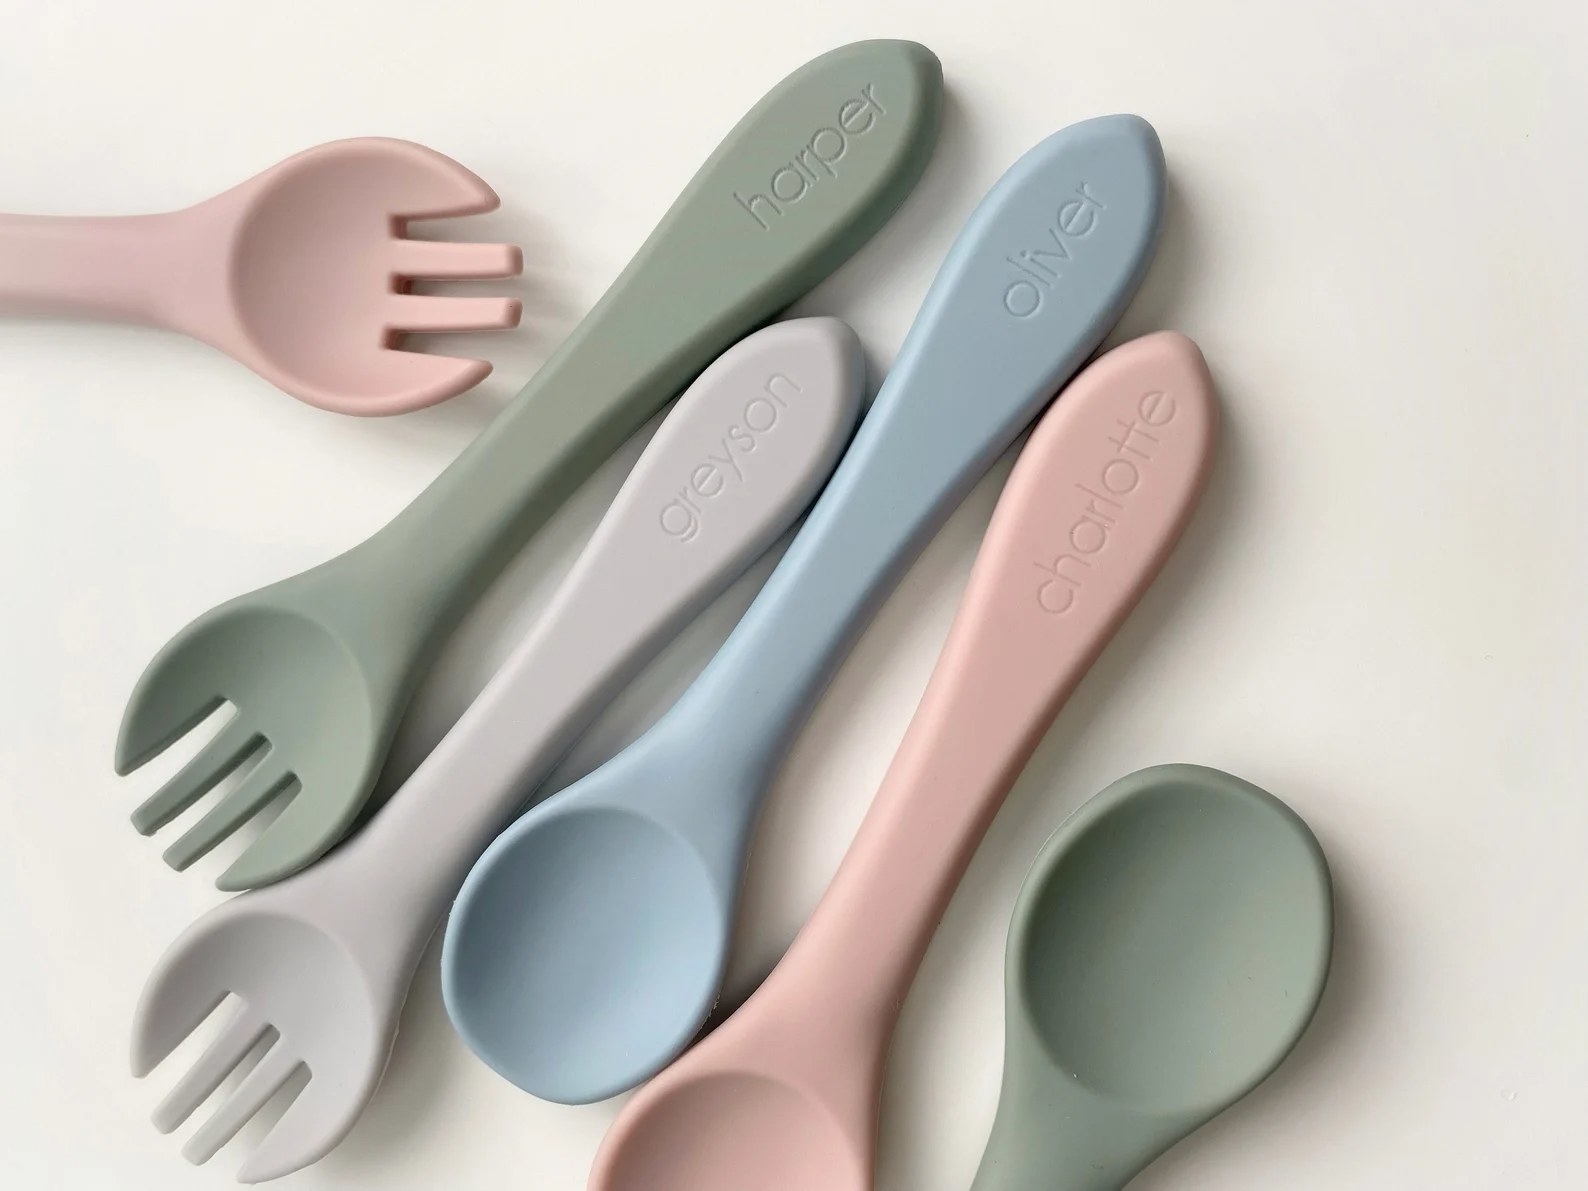 Multi-colored silicone forks and spoons for babies and toddlers with names engraved